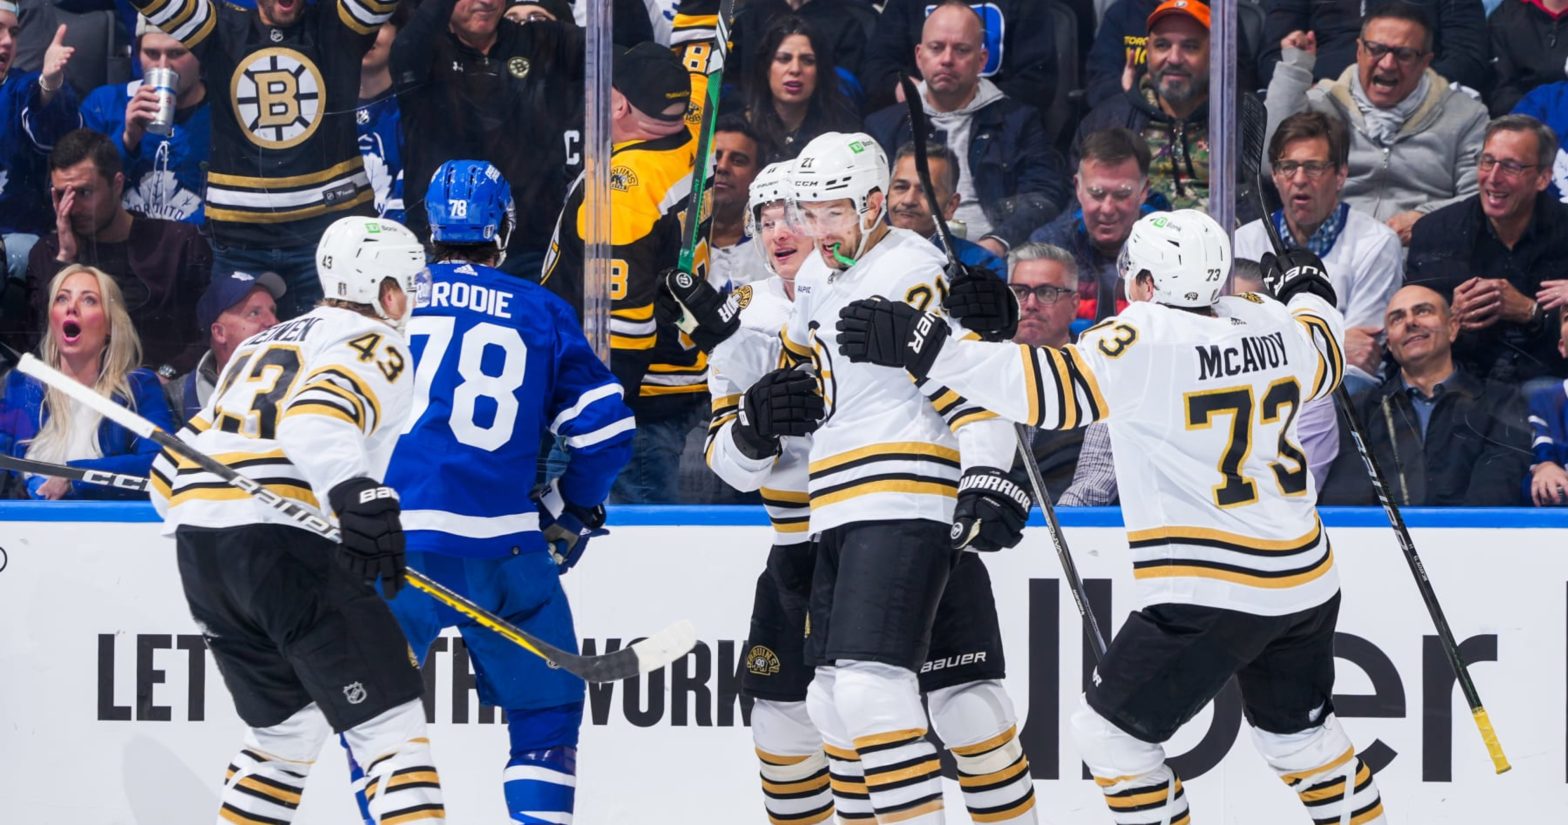 NHL Fans Cheer as Brad Marchand and Bruins Go Up 3-1 Against Maple Leafs -  Sports Al Dente